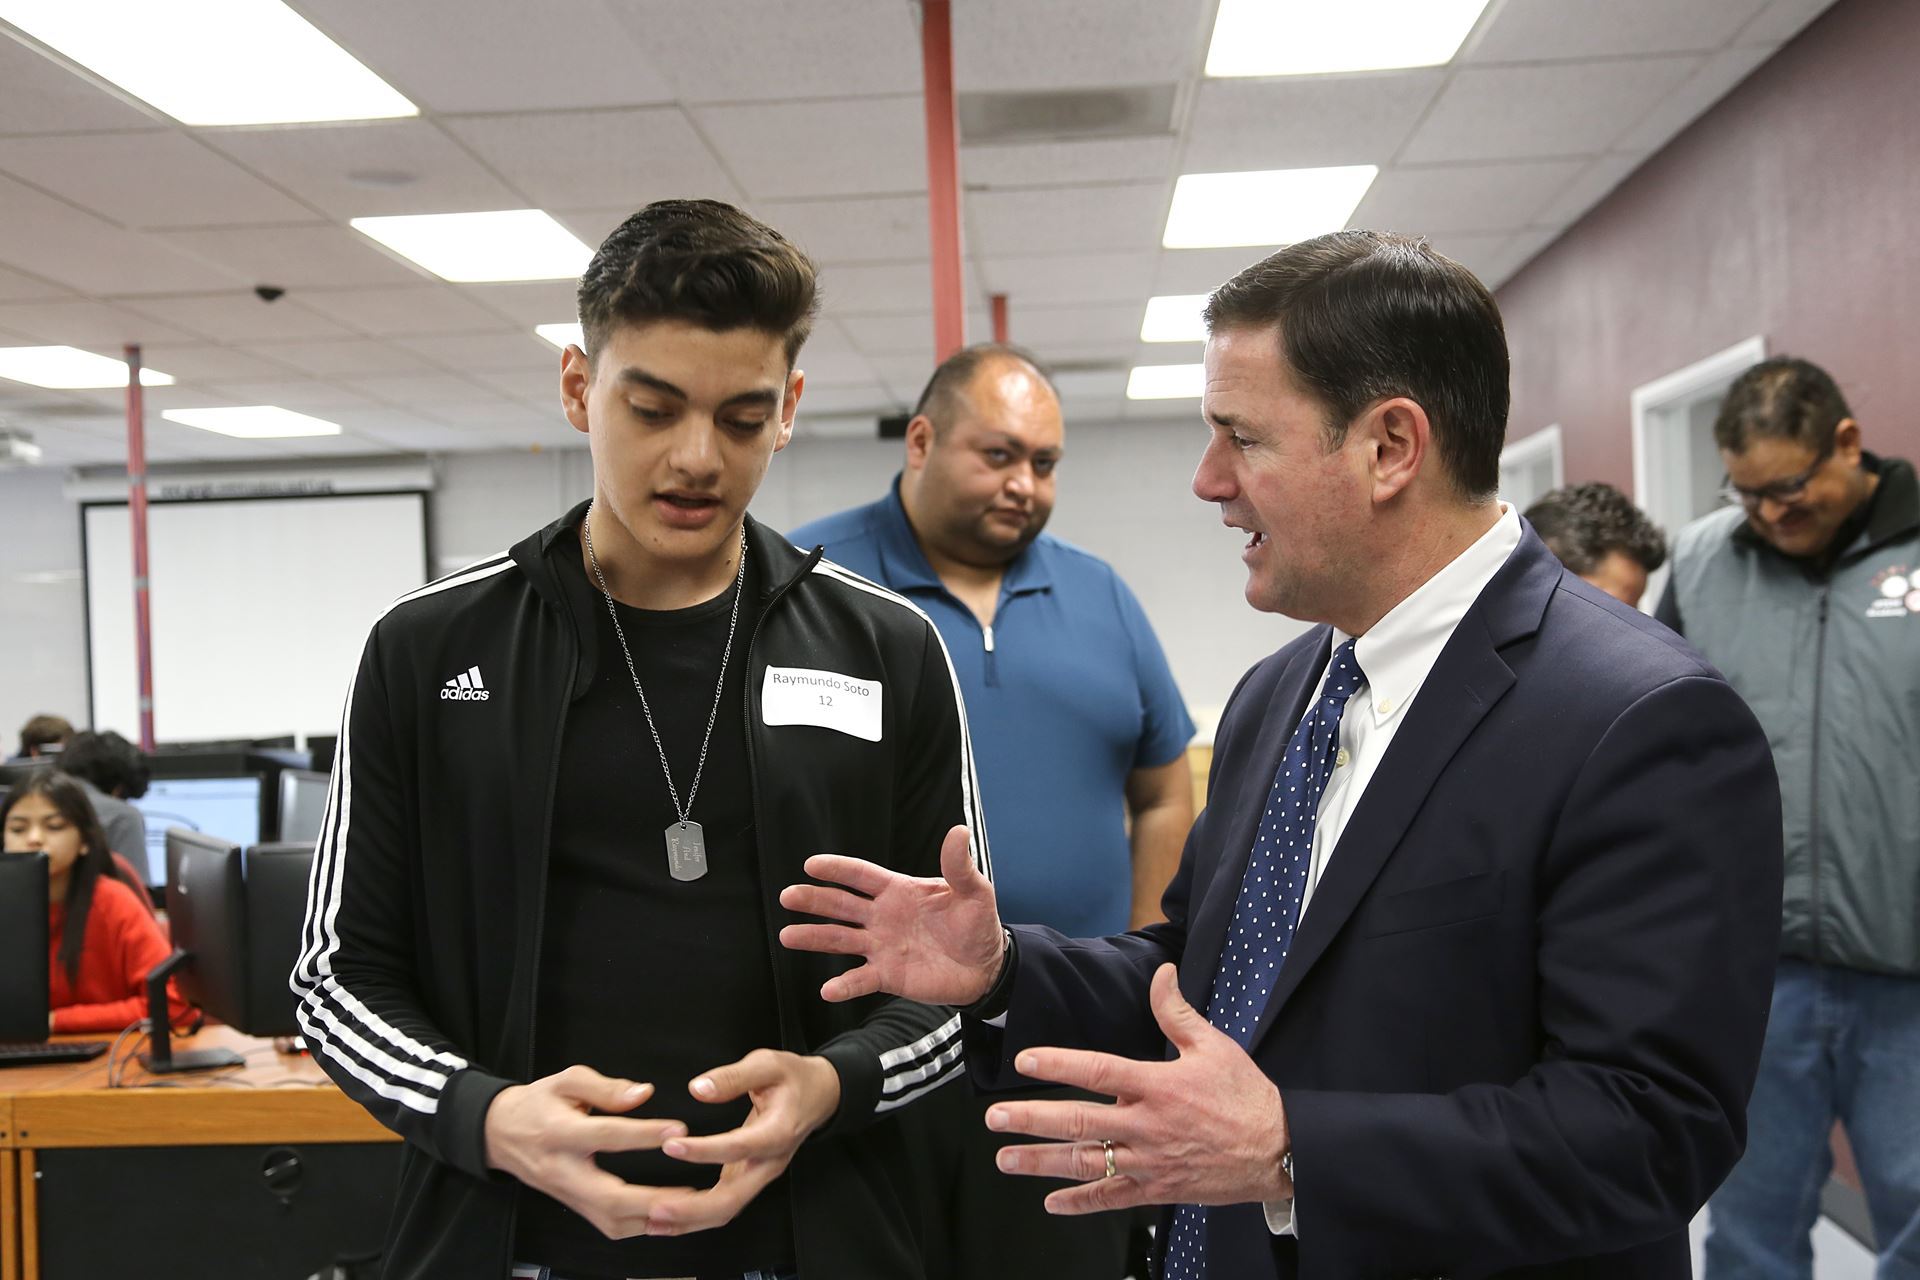 Governor Ducey Visits Desert View